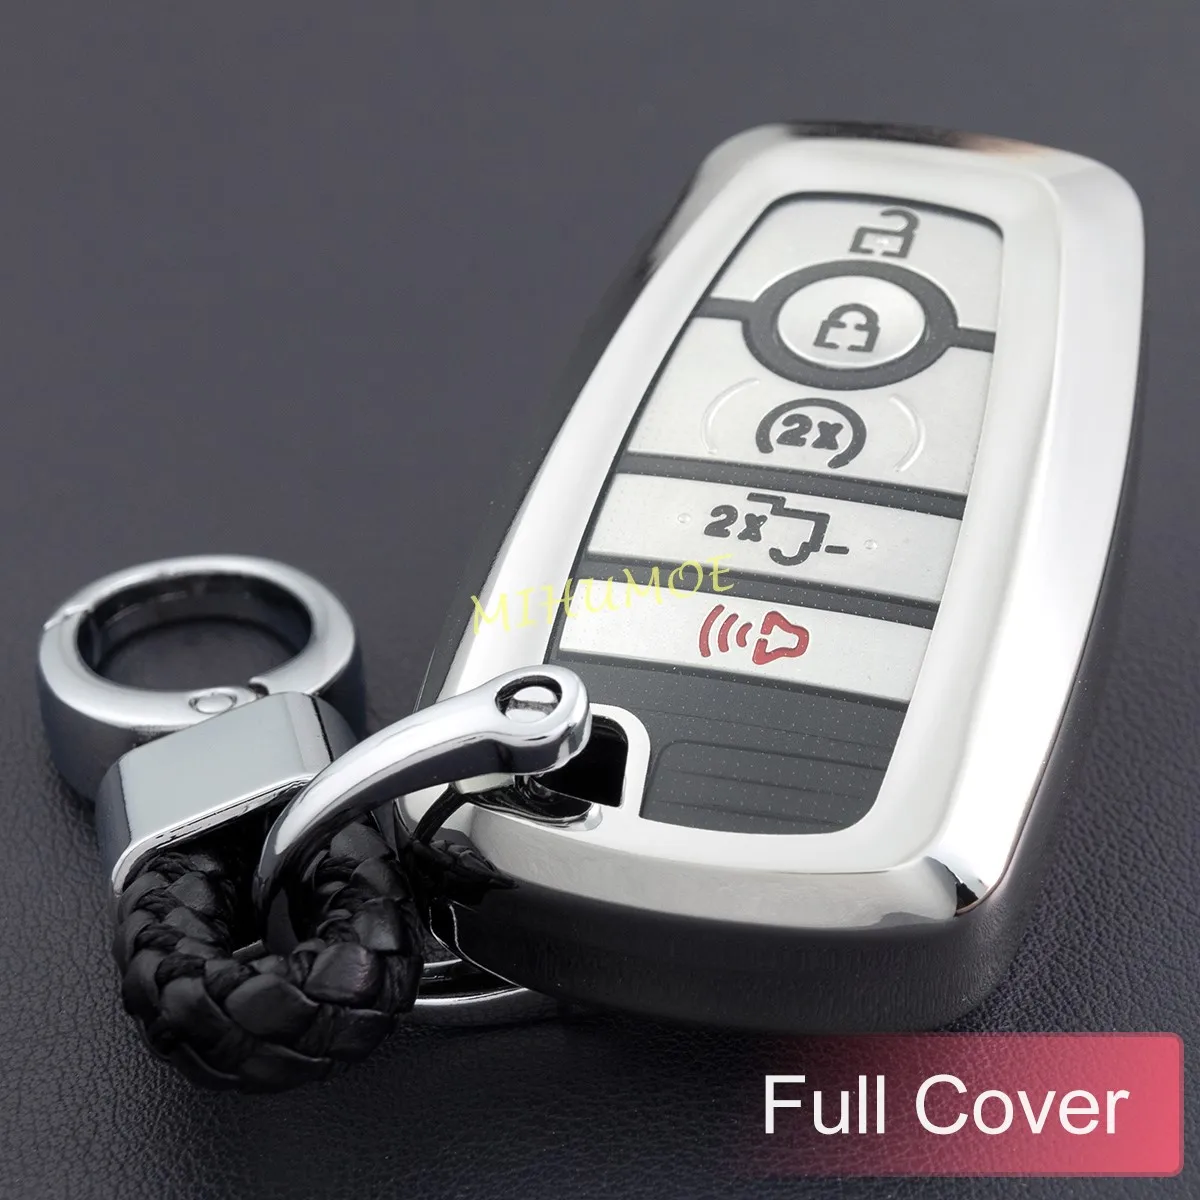 New Finer Smart Car Key case Protector Holder cover For Ford Lincoln Key Case 